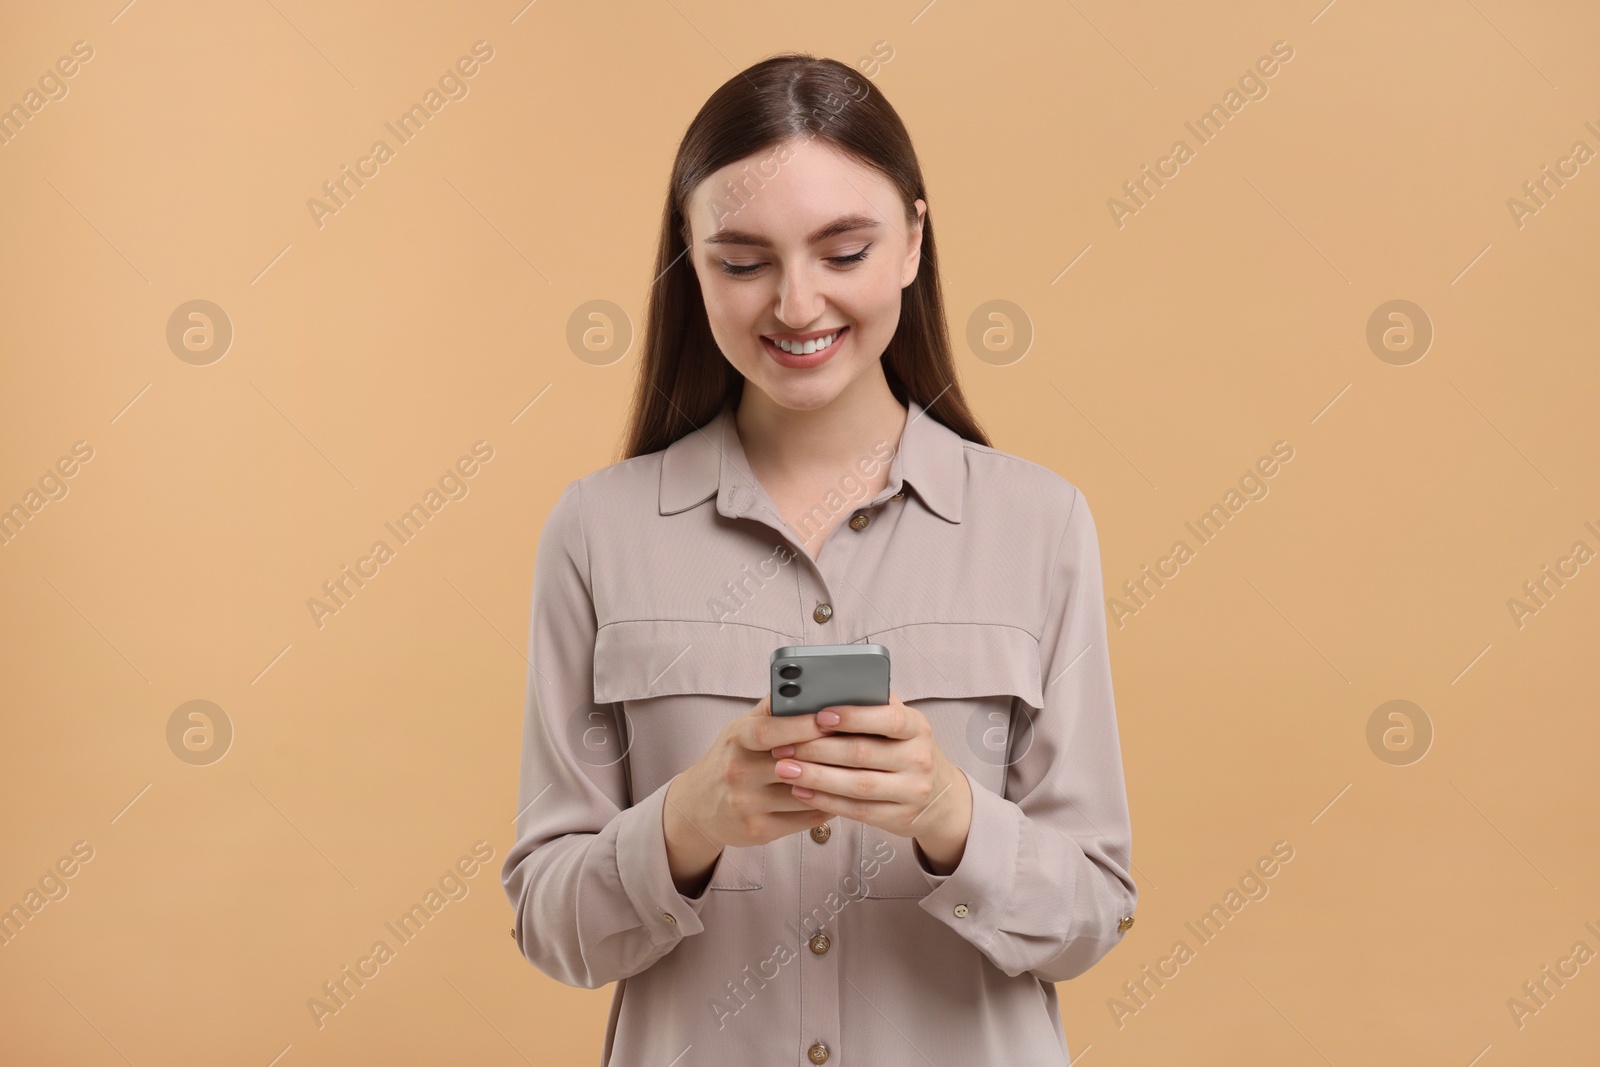 Photo of Smiling woman using smartphone on beige background